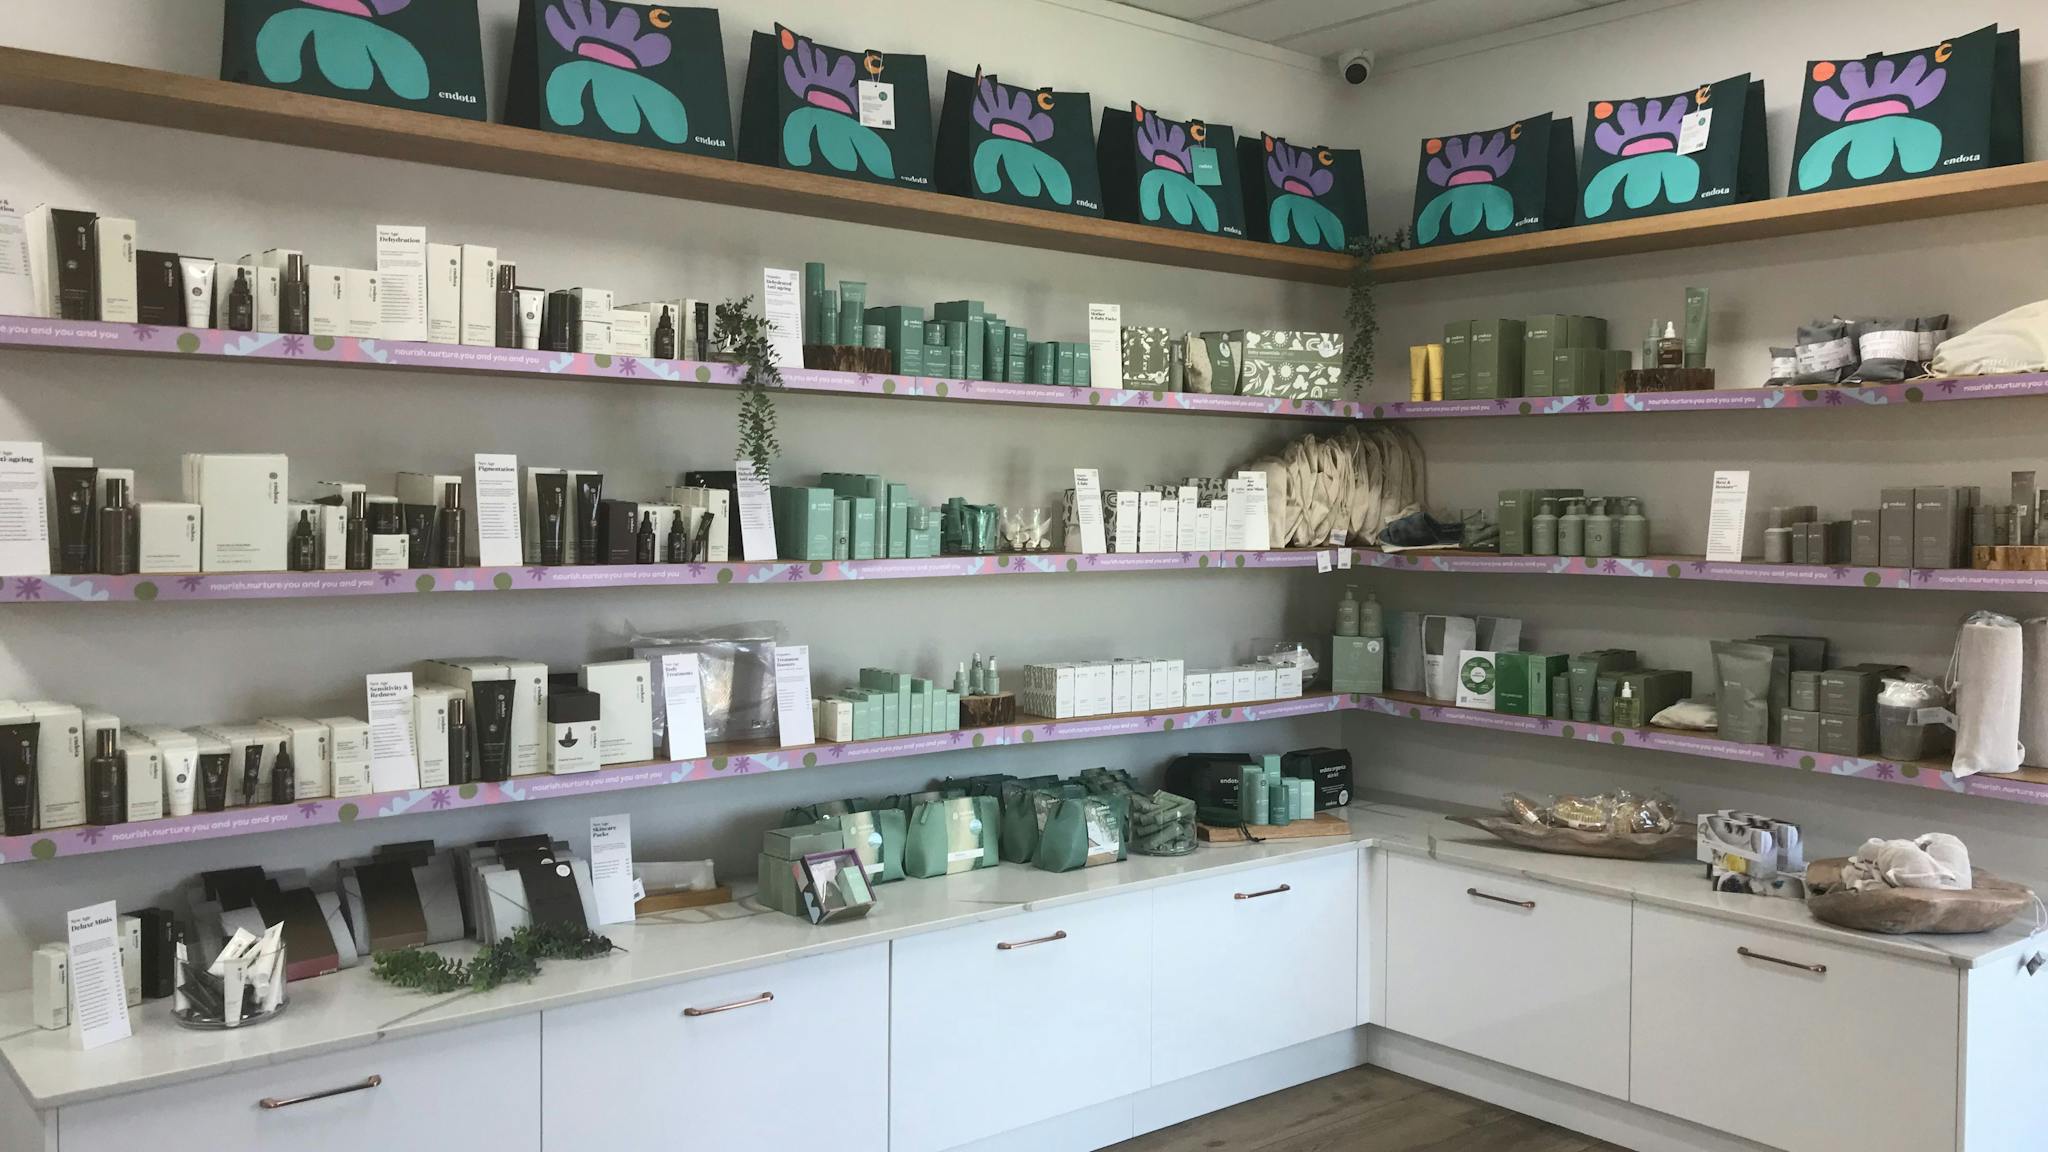 Retail shelving of skincare and wellness products available for purchase